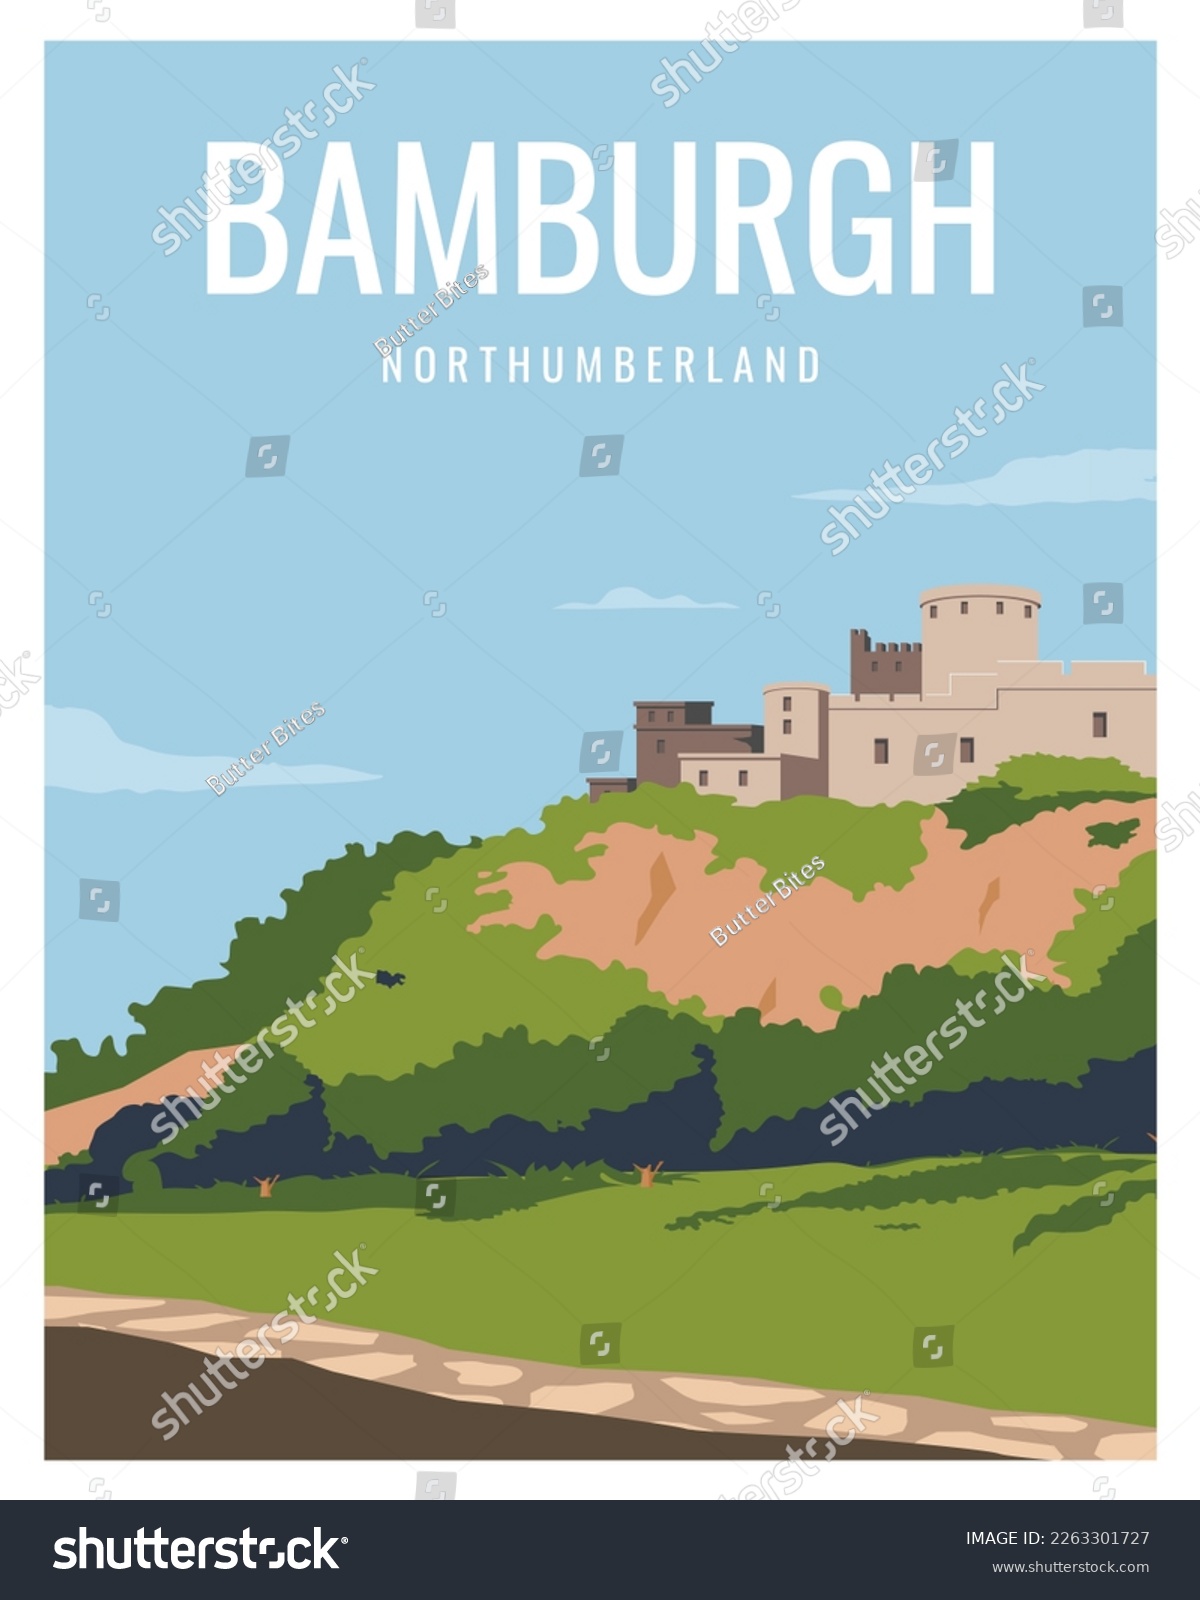 SVG of Panorama Castle on hill in Bamburgh, Northumberland.
vector illustration landscape with colored style suitable for poster, postcard, card, print. svg